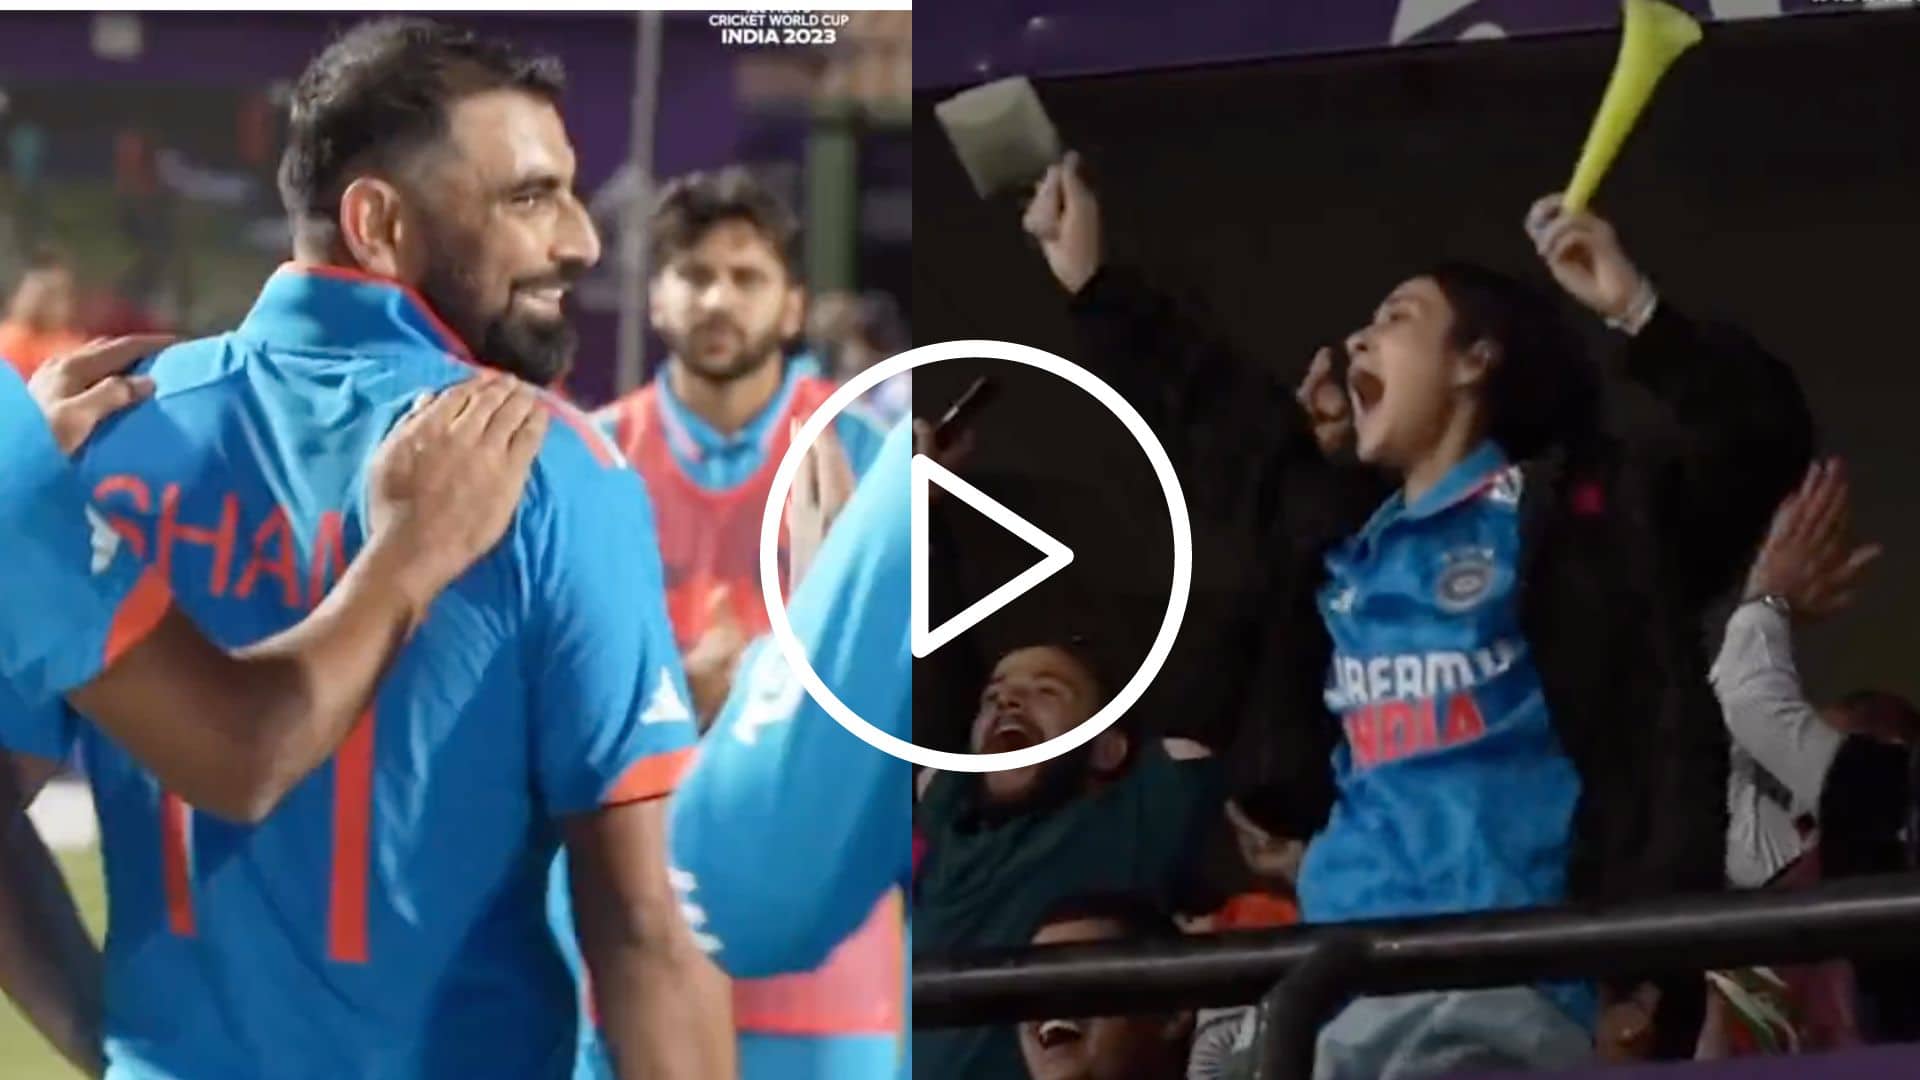 [Watch] 'Shami, Shami' Chants Go Wild In Dharamsala  After His Stunning Five-Wicket Haul vs NZ